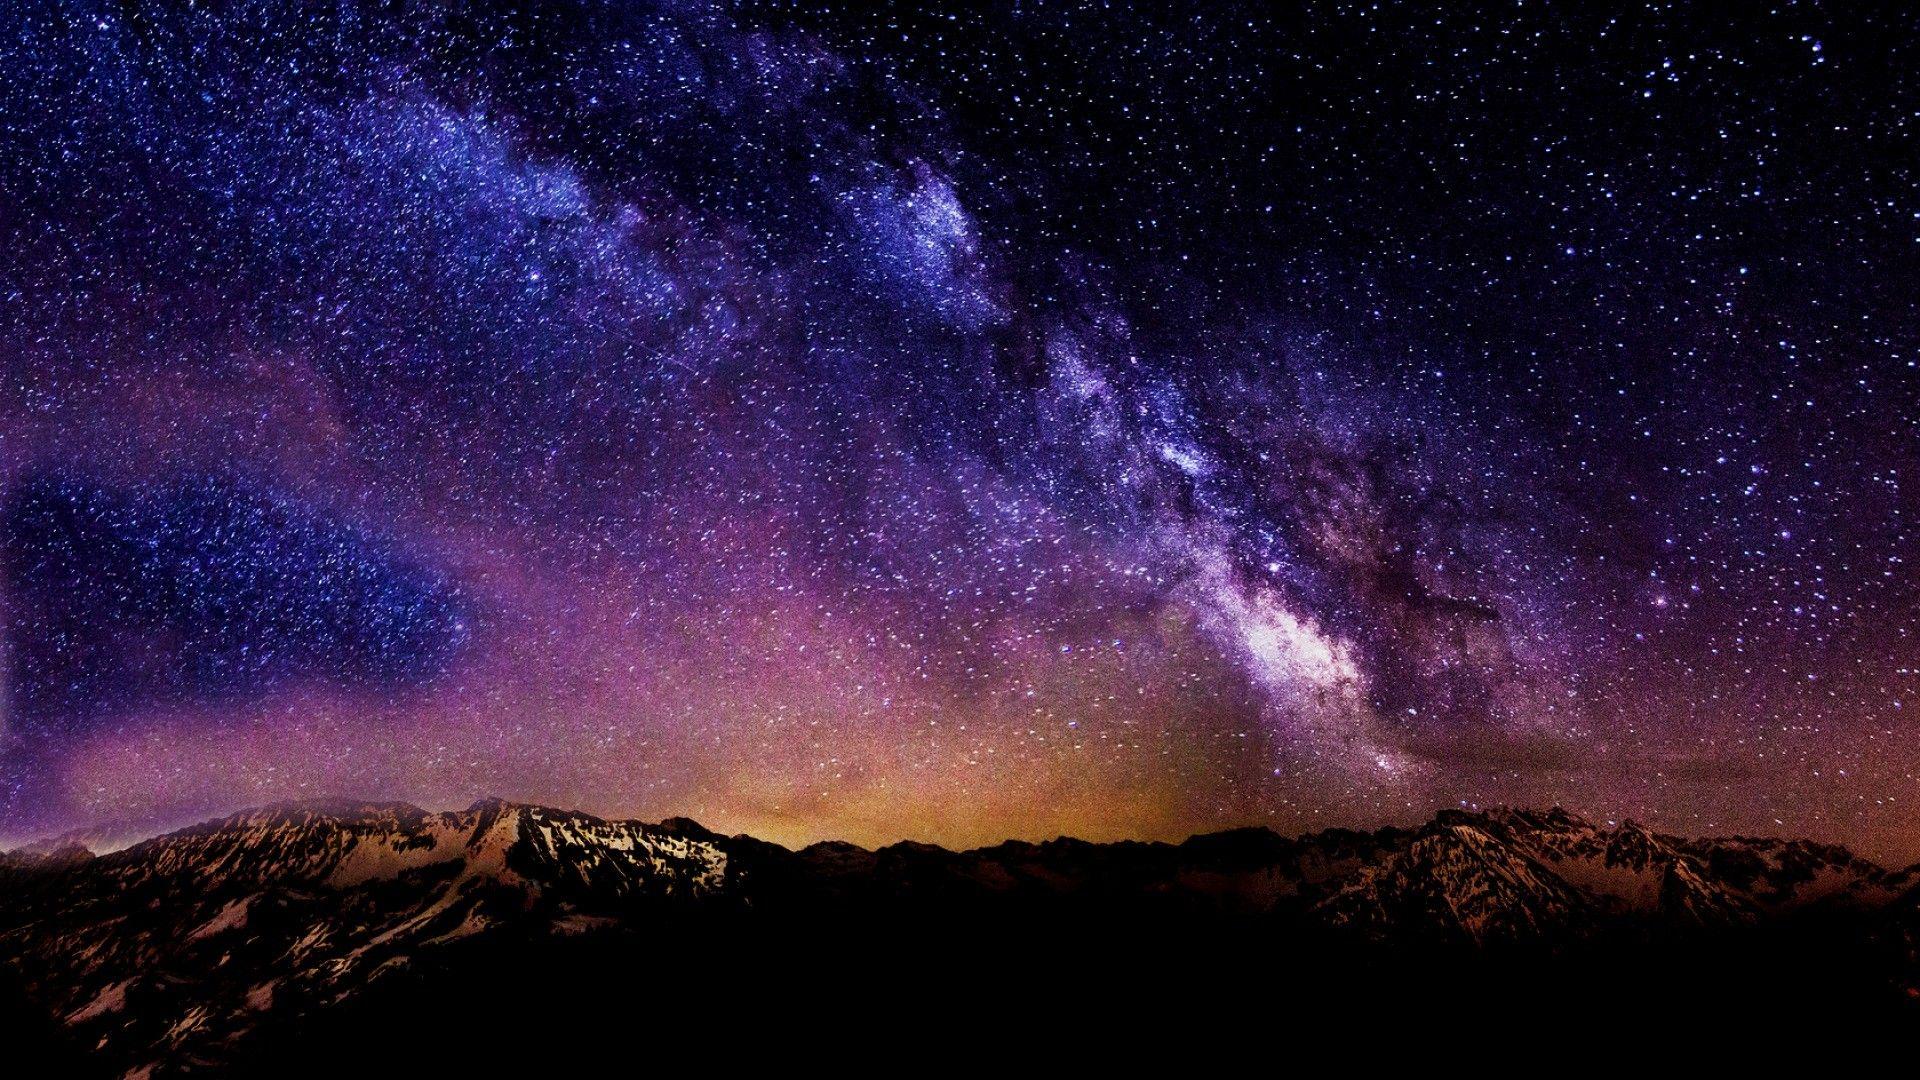 Discover the best desktop background night collection of stunning nighttime photos